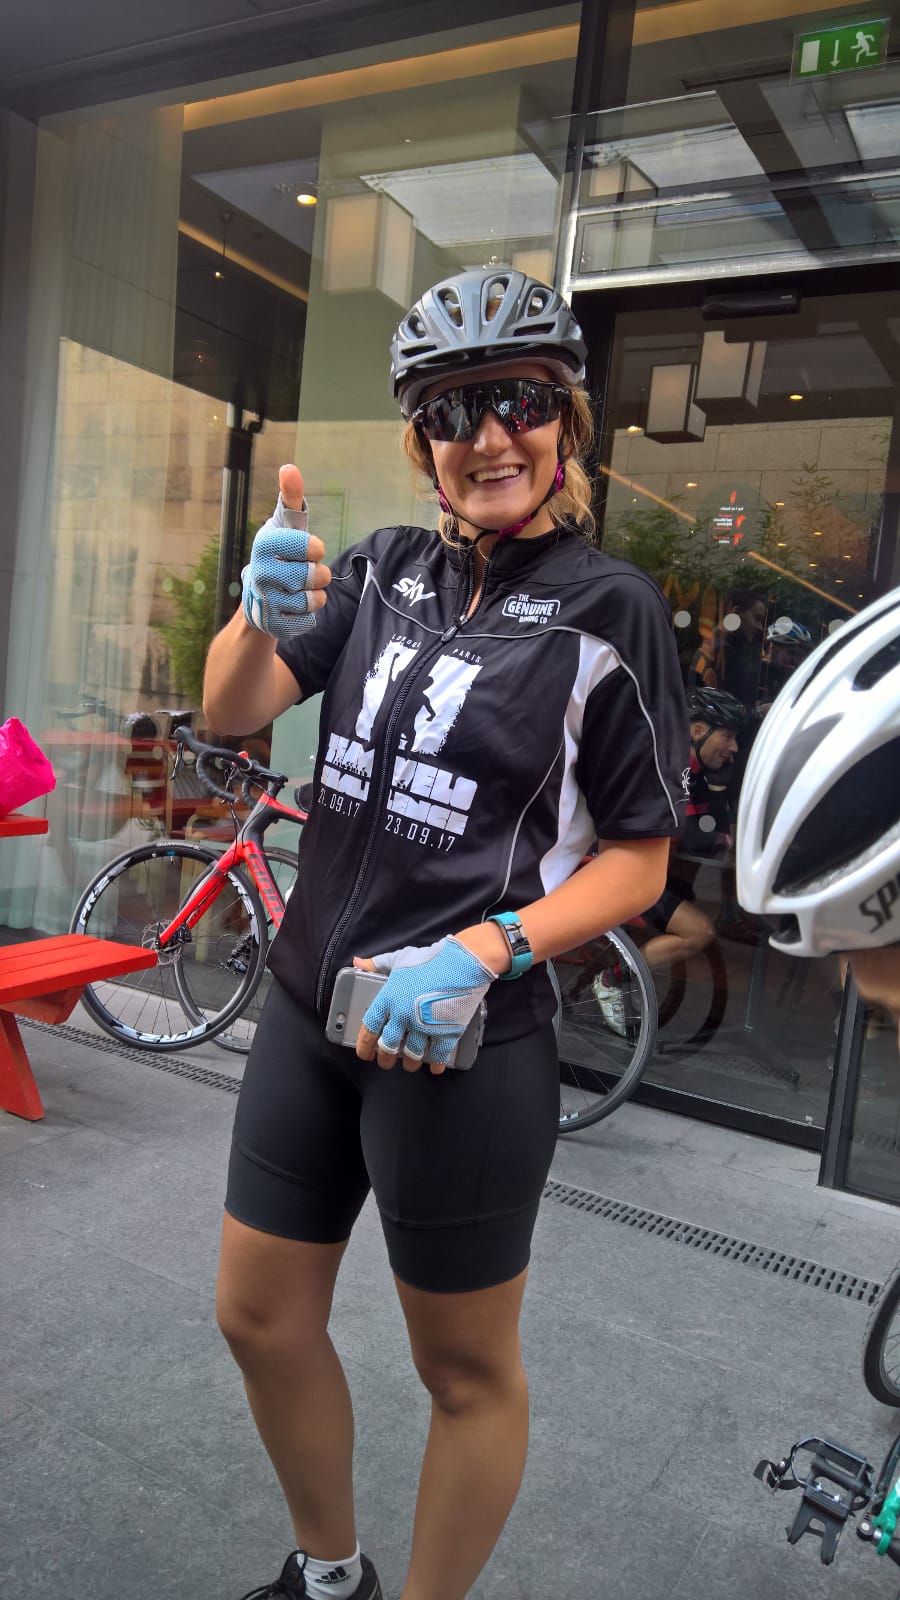 Lexington's Amy-Jane Cycling From London To Pari